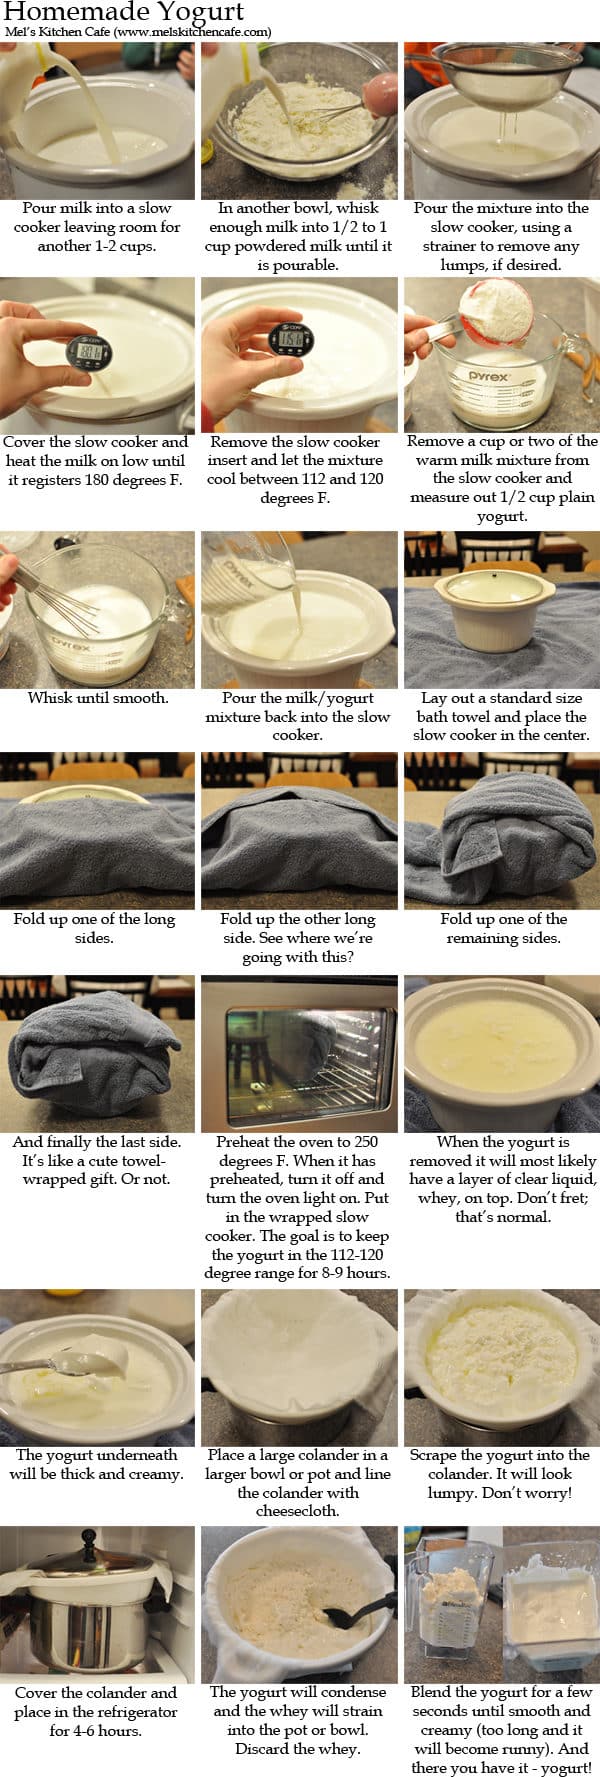 A collage of pictures and instructions showing how to make homemade yogurt step-by-step.